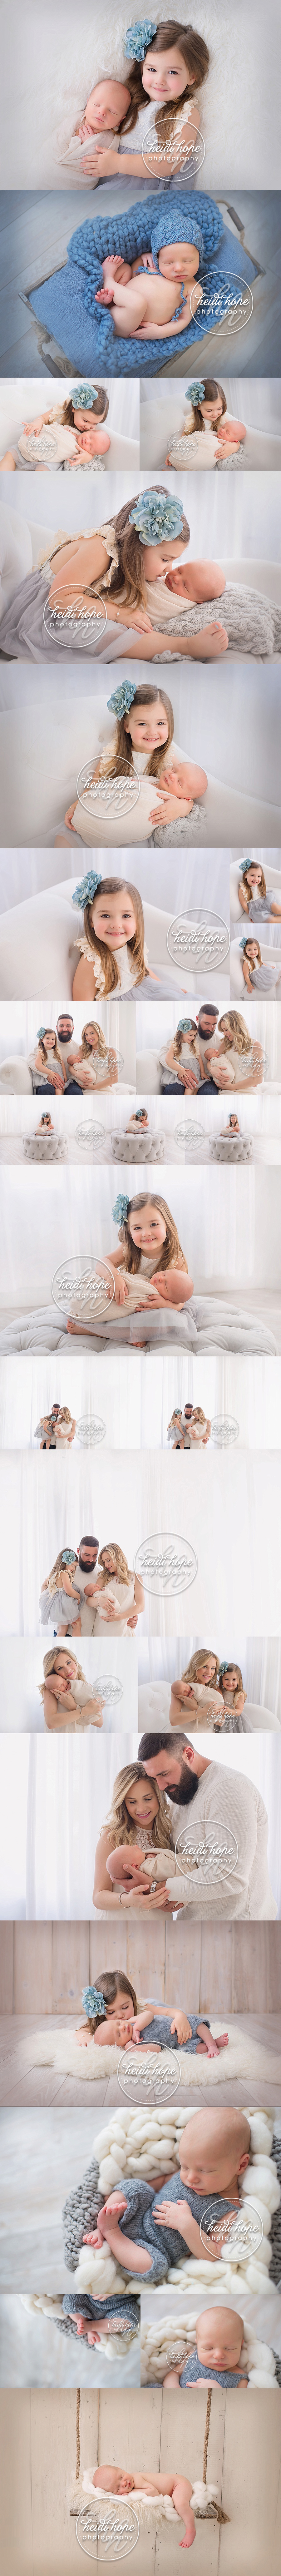 big-sister-welcomes-her-newborn-baby-brother-in-a-timeless-baby-boy-session